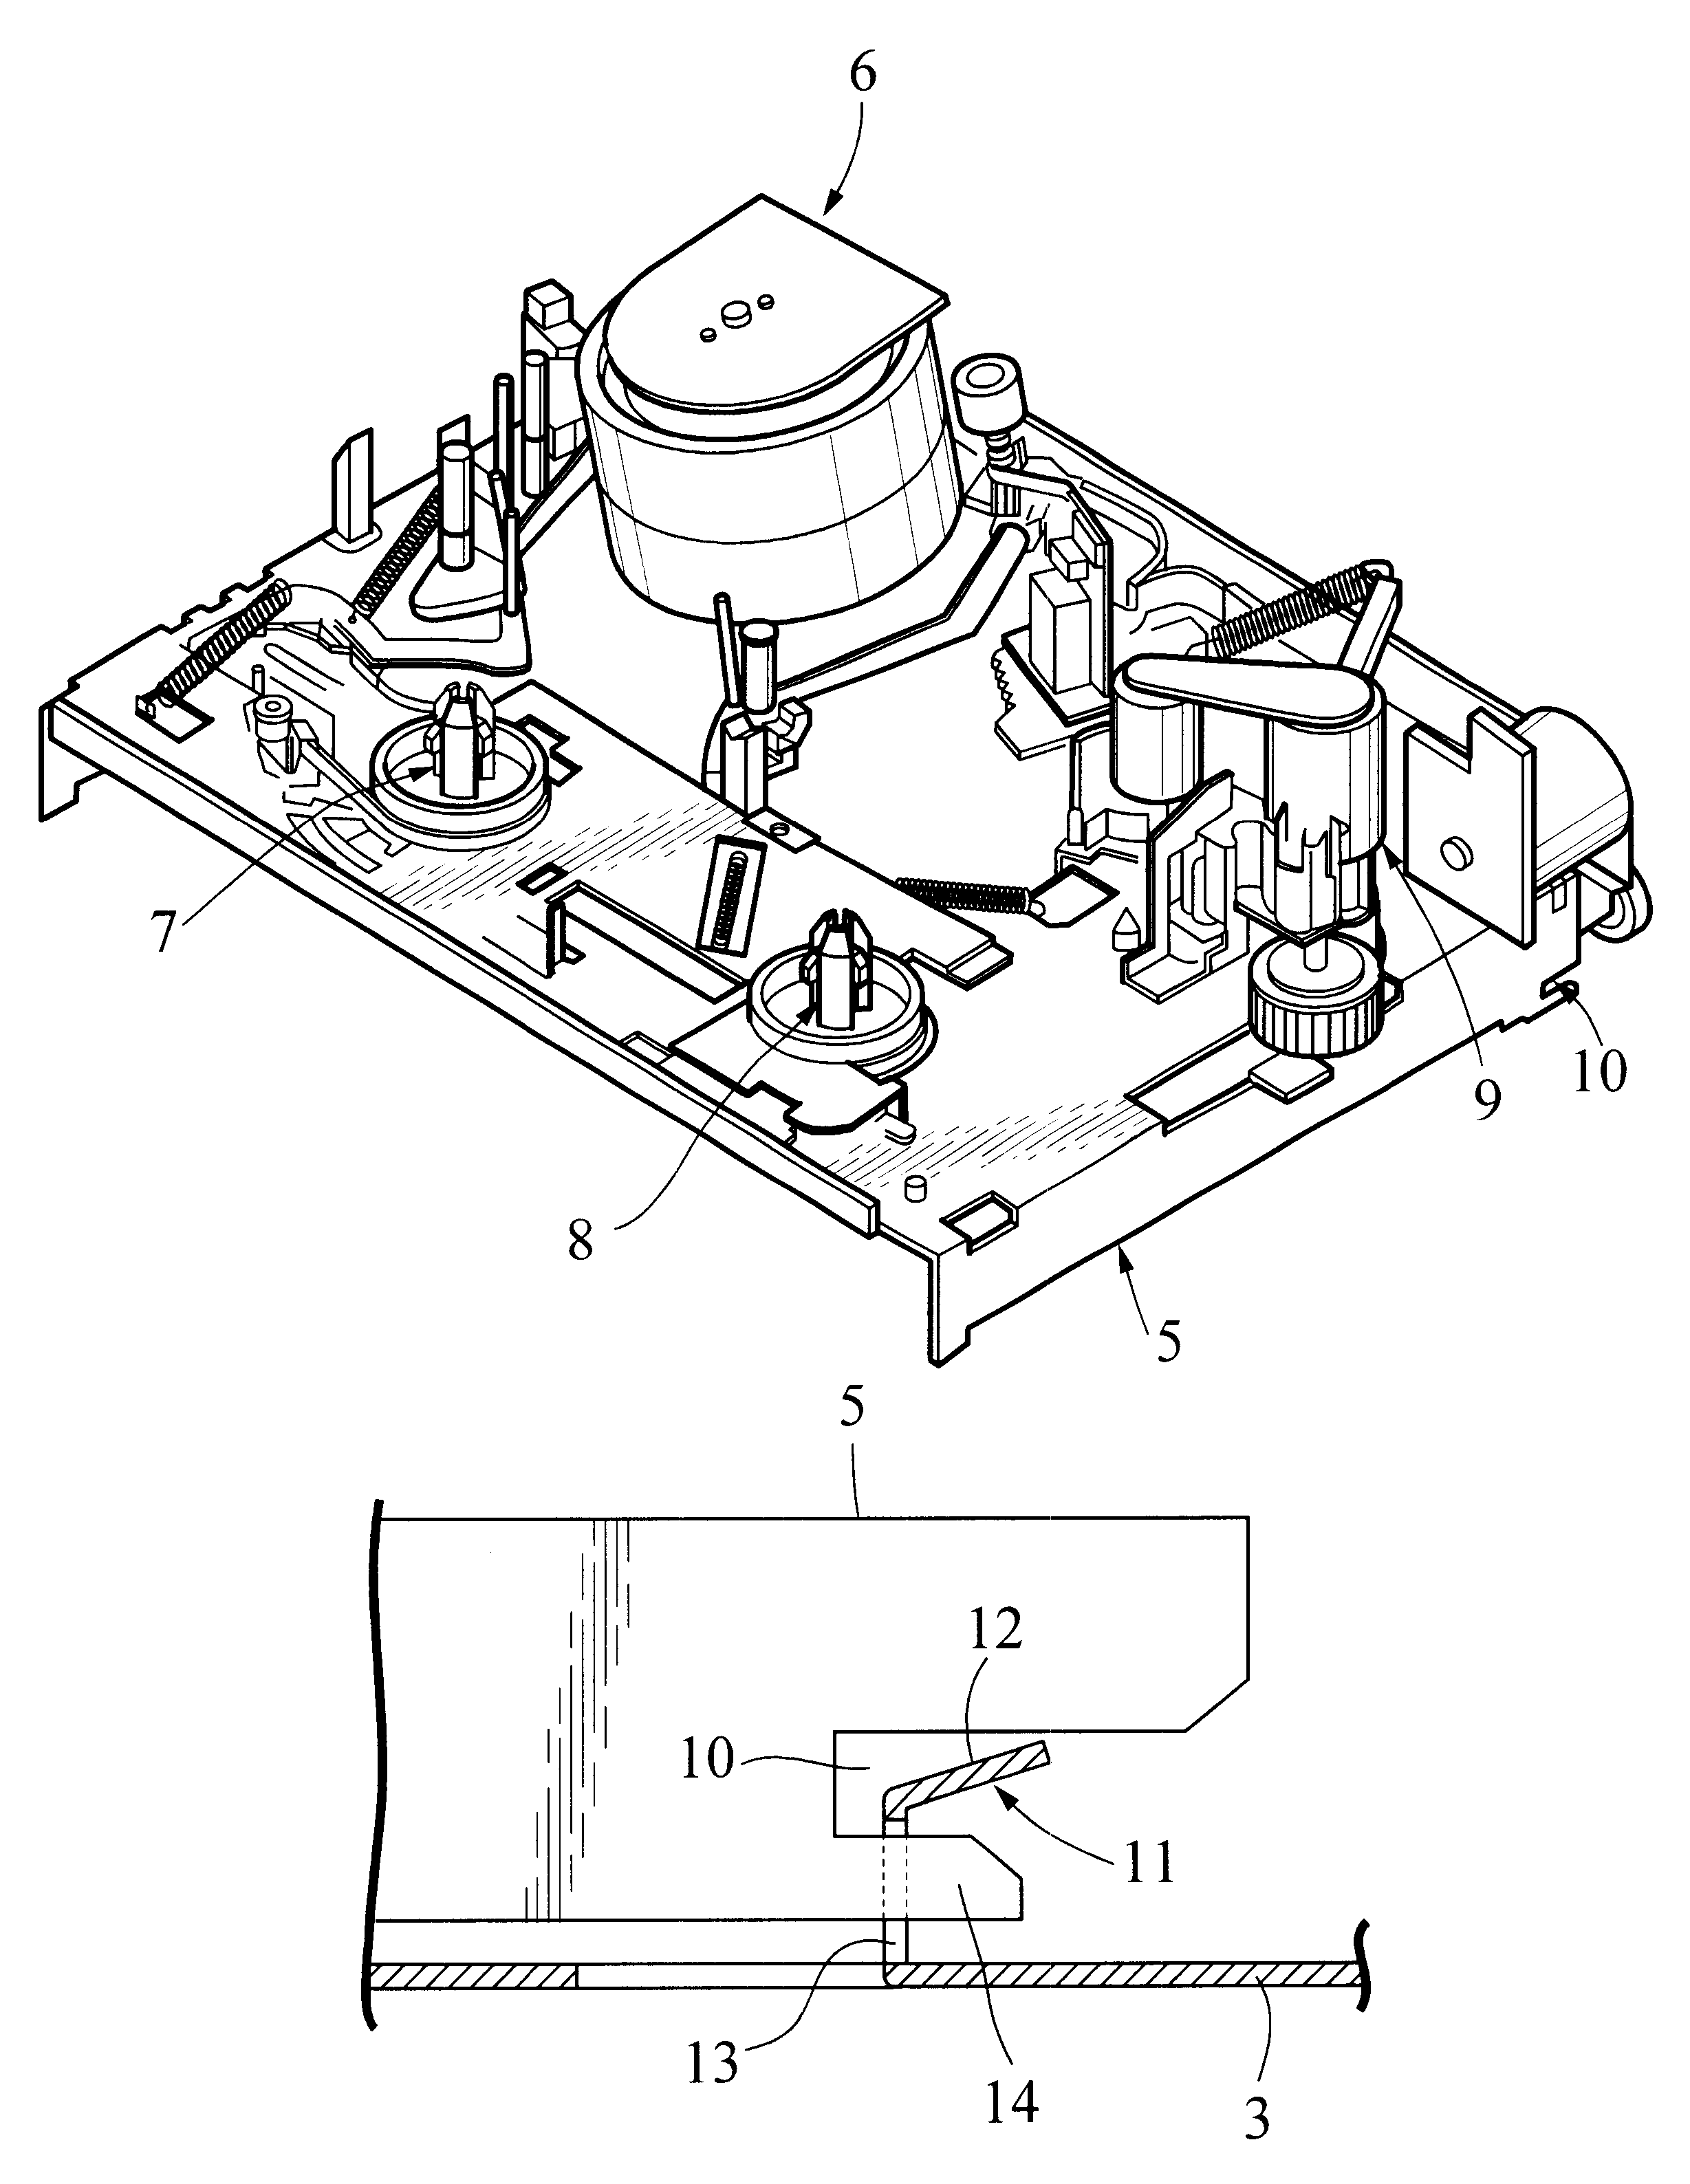 Cabinet structure for a magnetic tape recorder